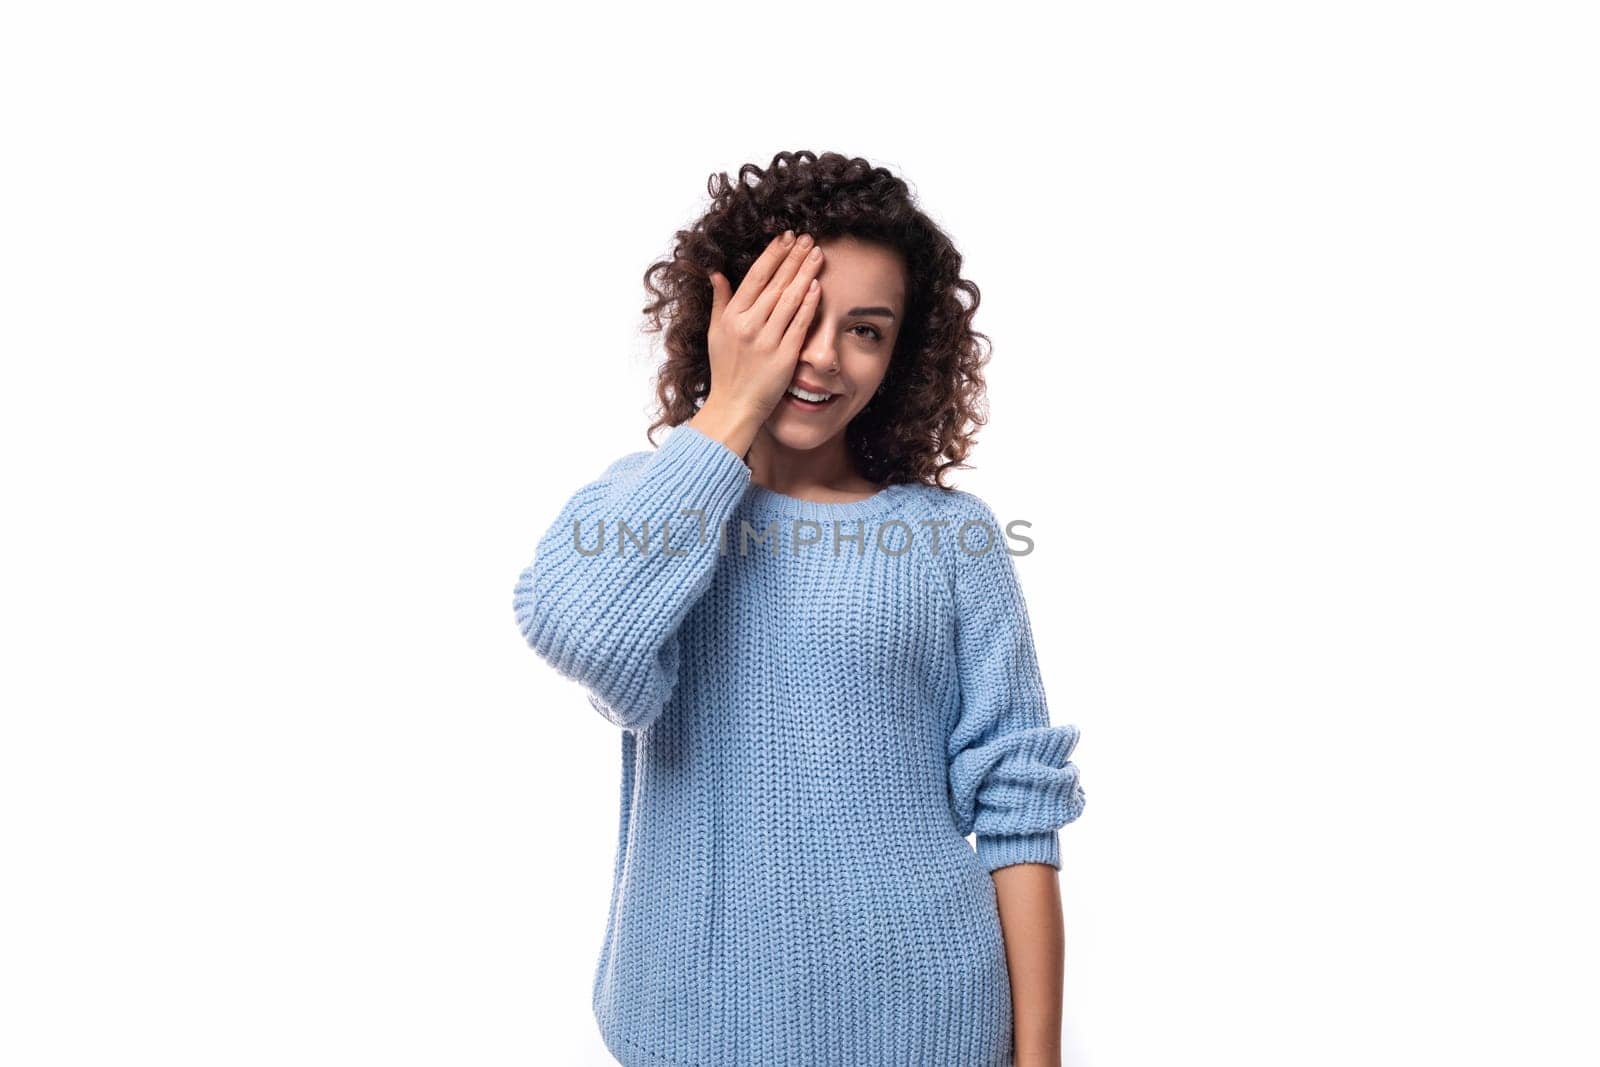 positive young lady with black curly hair dressed in a light blue sweater posing on a white background.